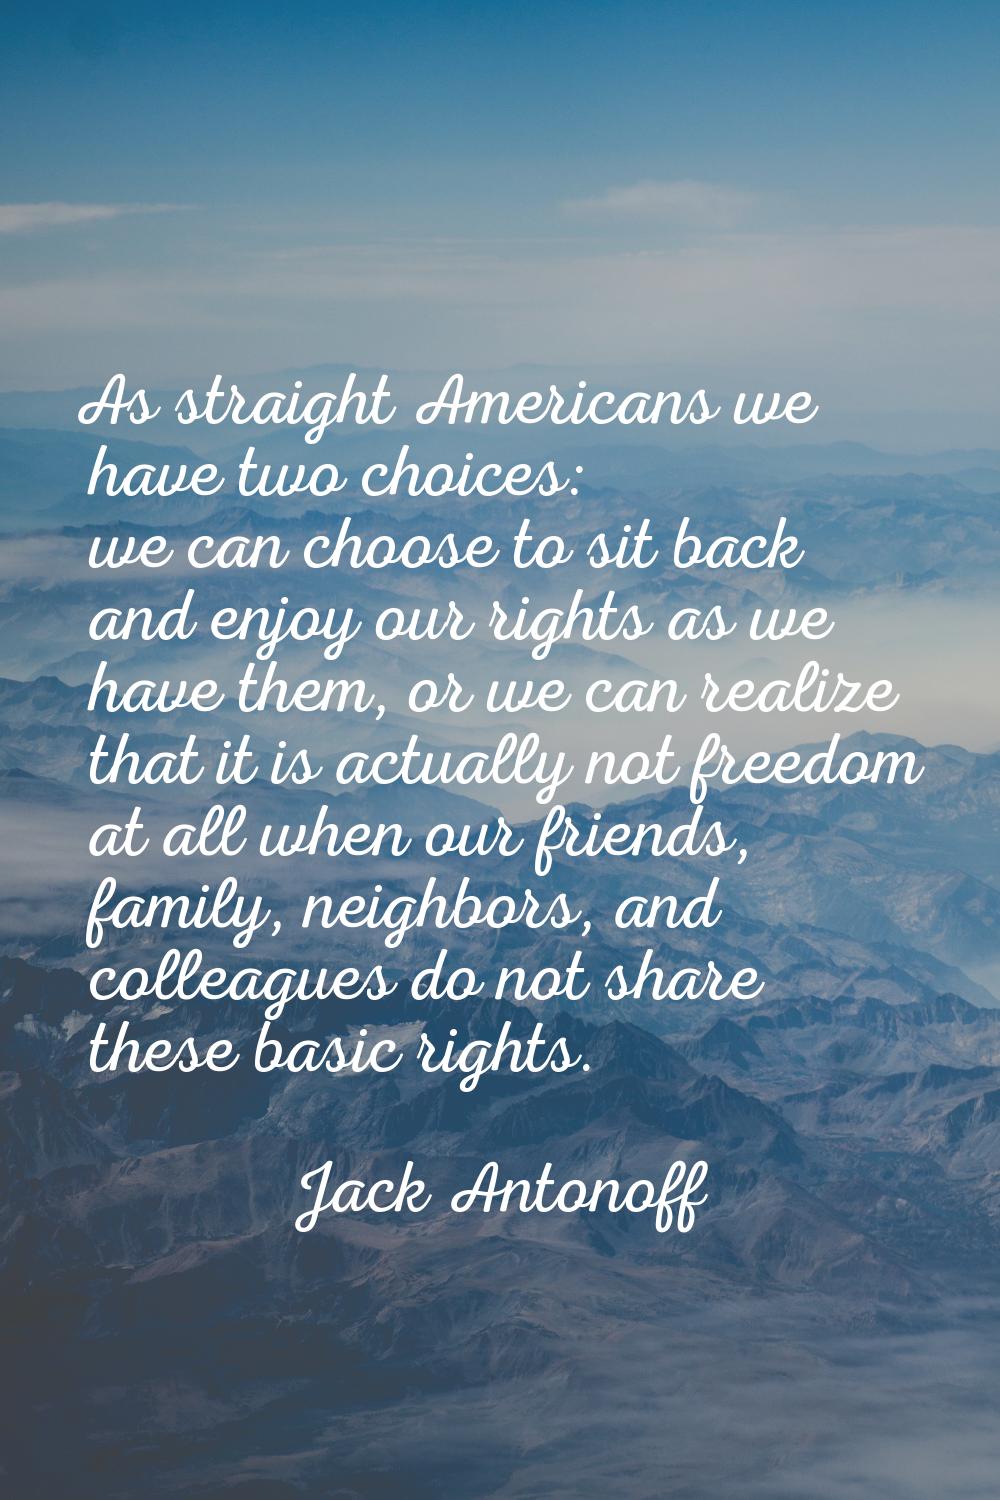 As straight Americans we have two choices: we can choose to sit back and enjoy our rights as we hav